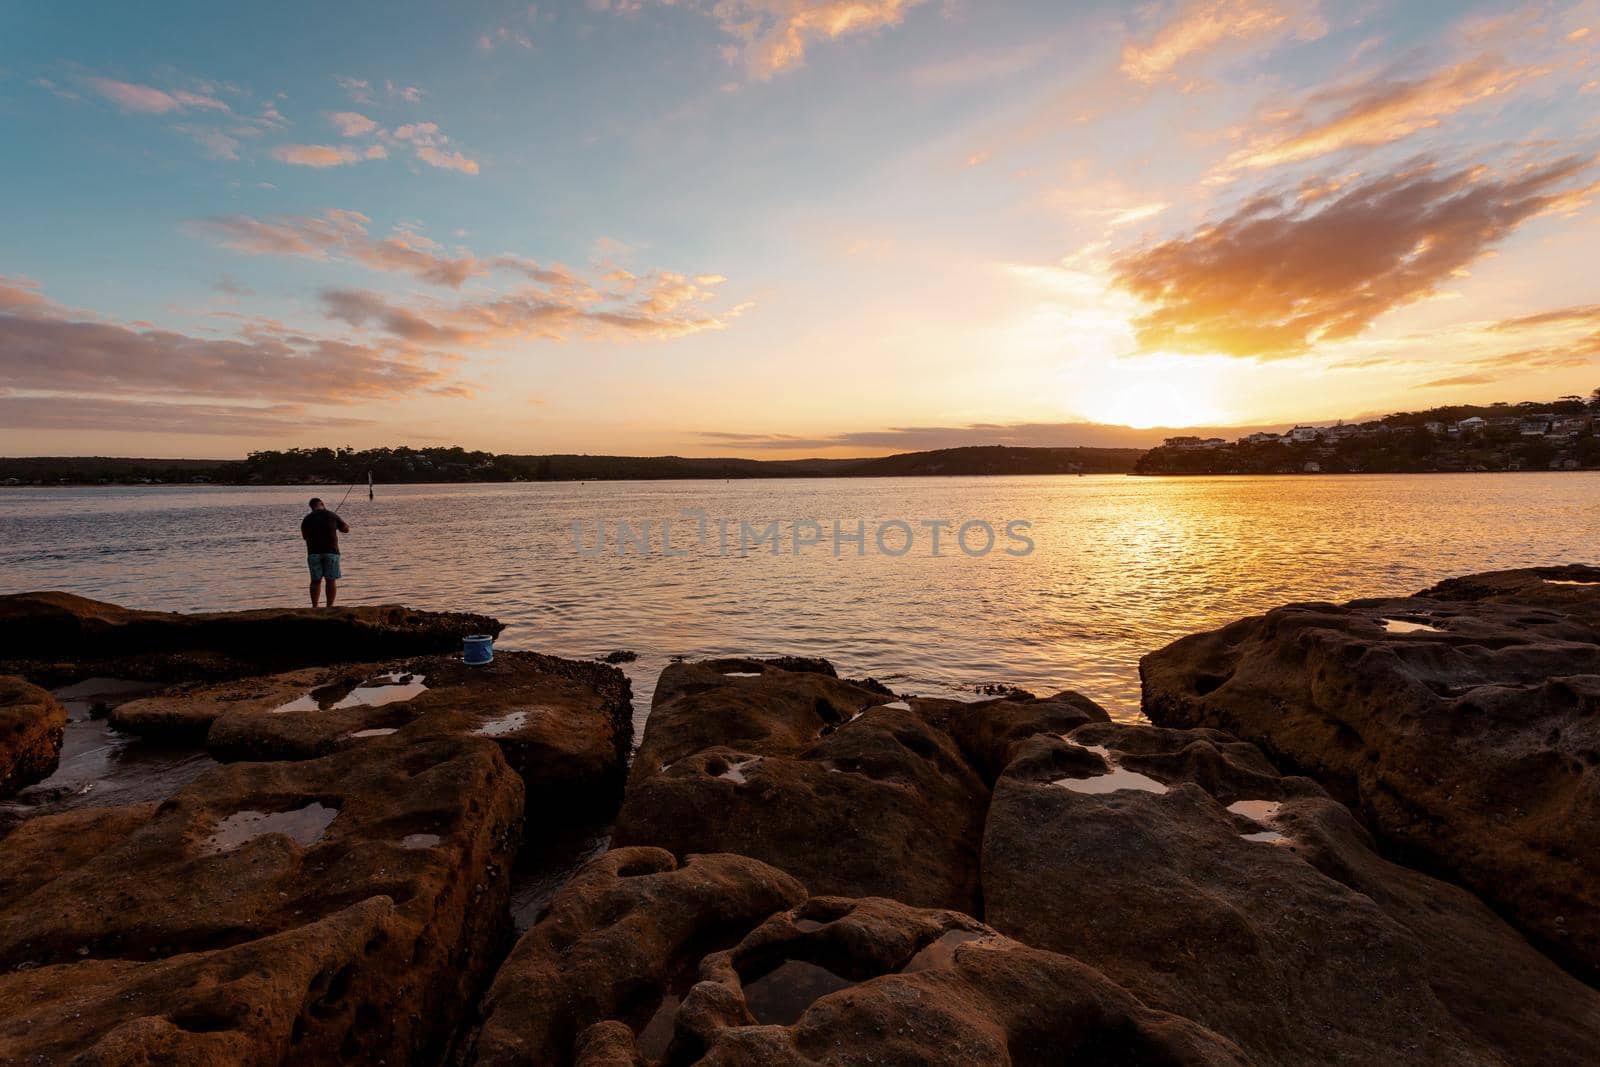 A fisherman on the rocks as the sun sets over the bay at days end.